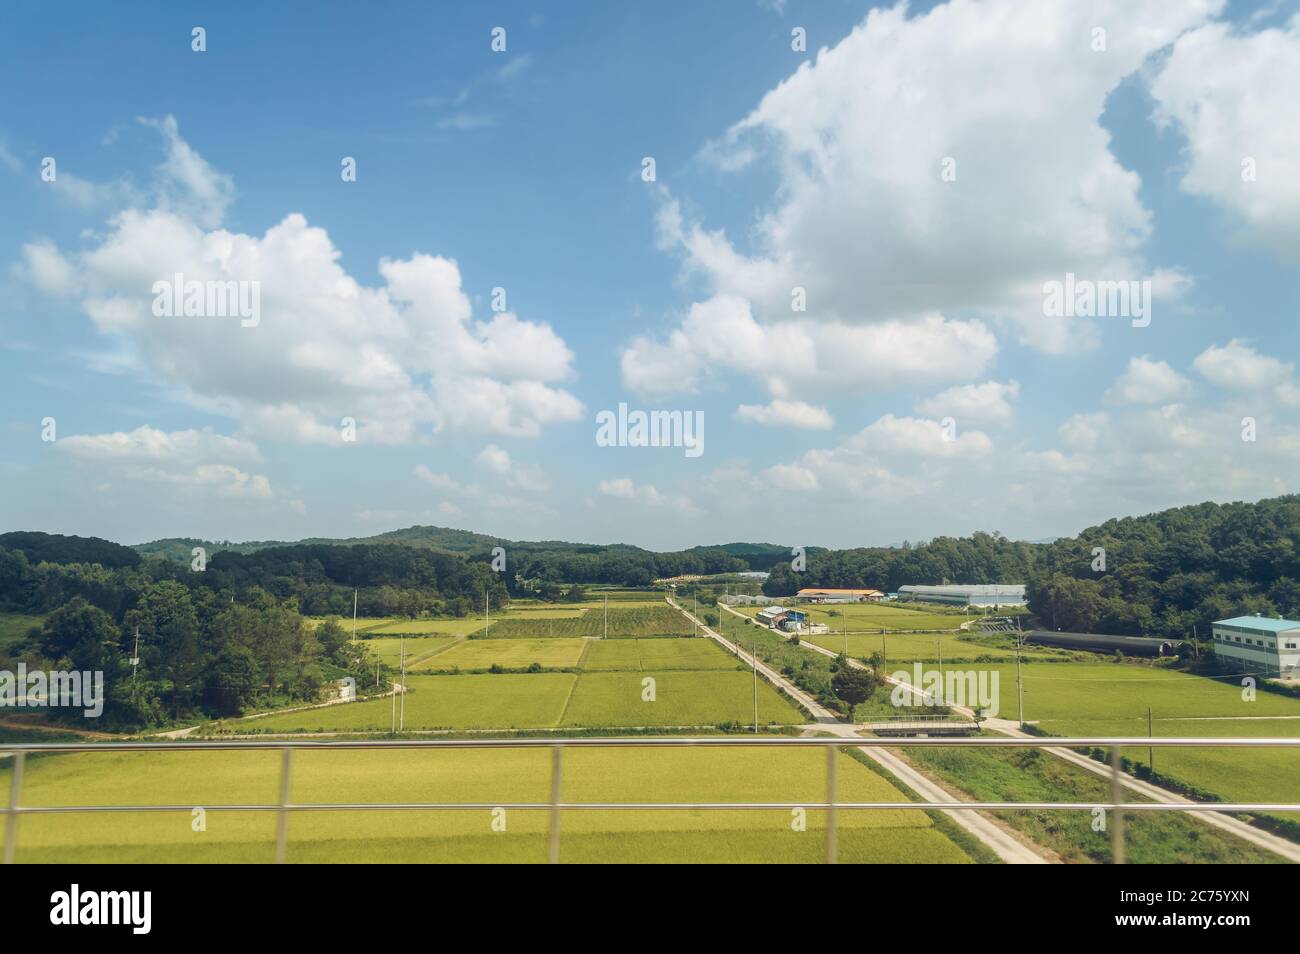 view of some green crops fields in rural area of South Korea on sunny day Stock Photo